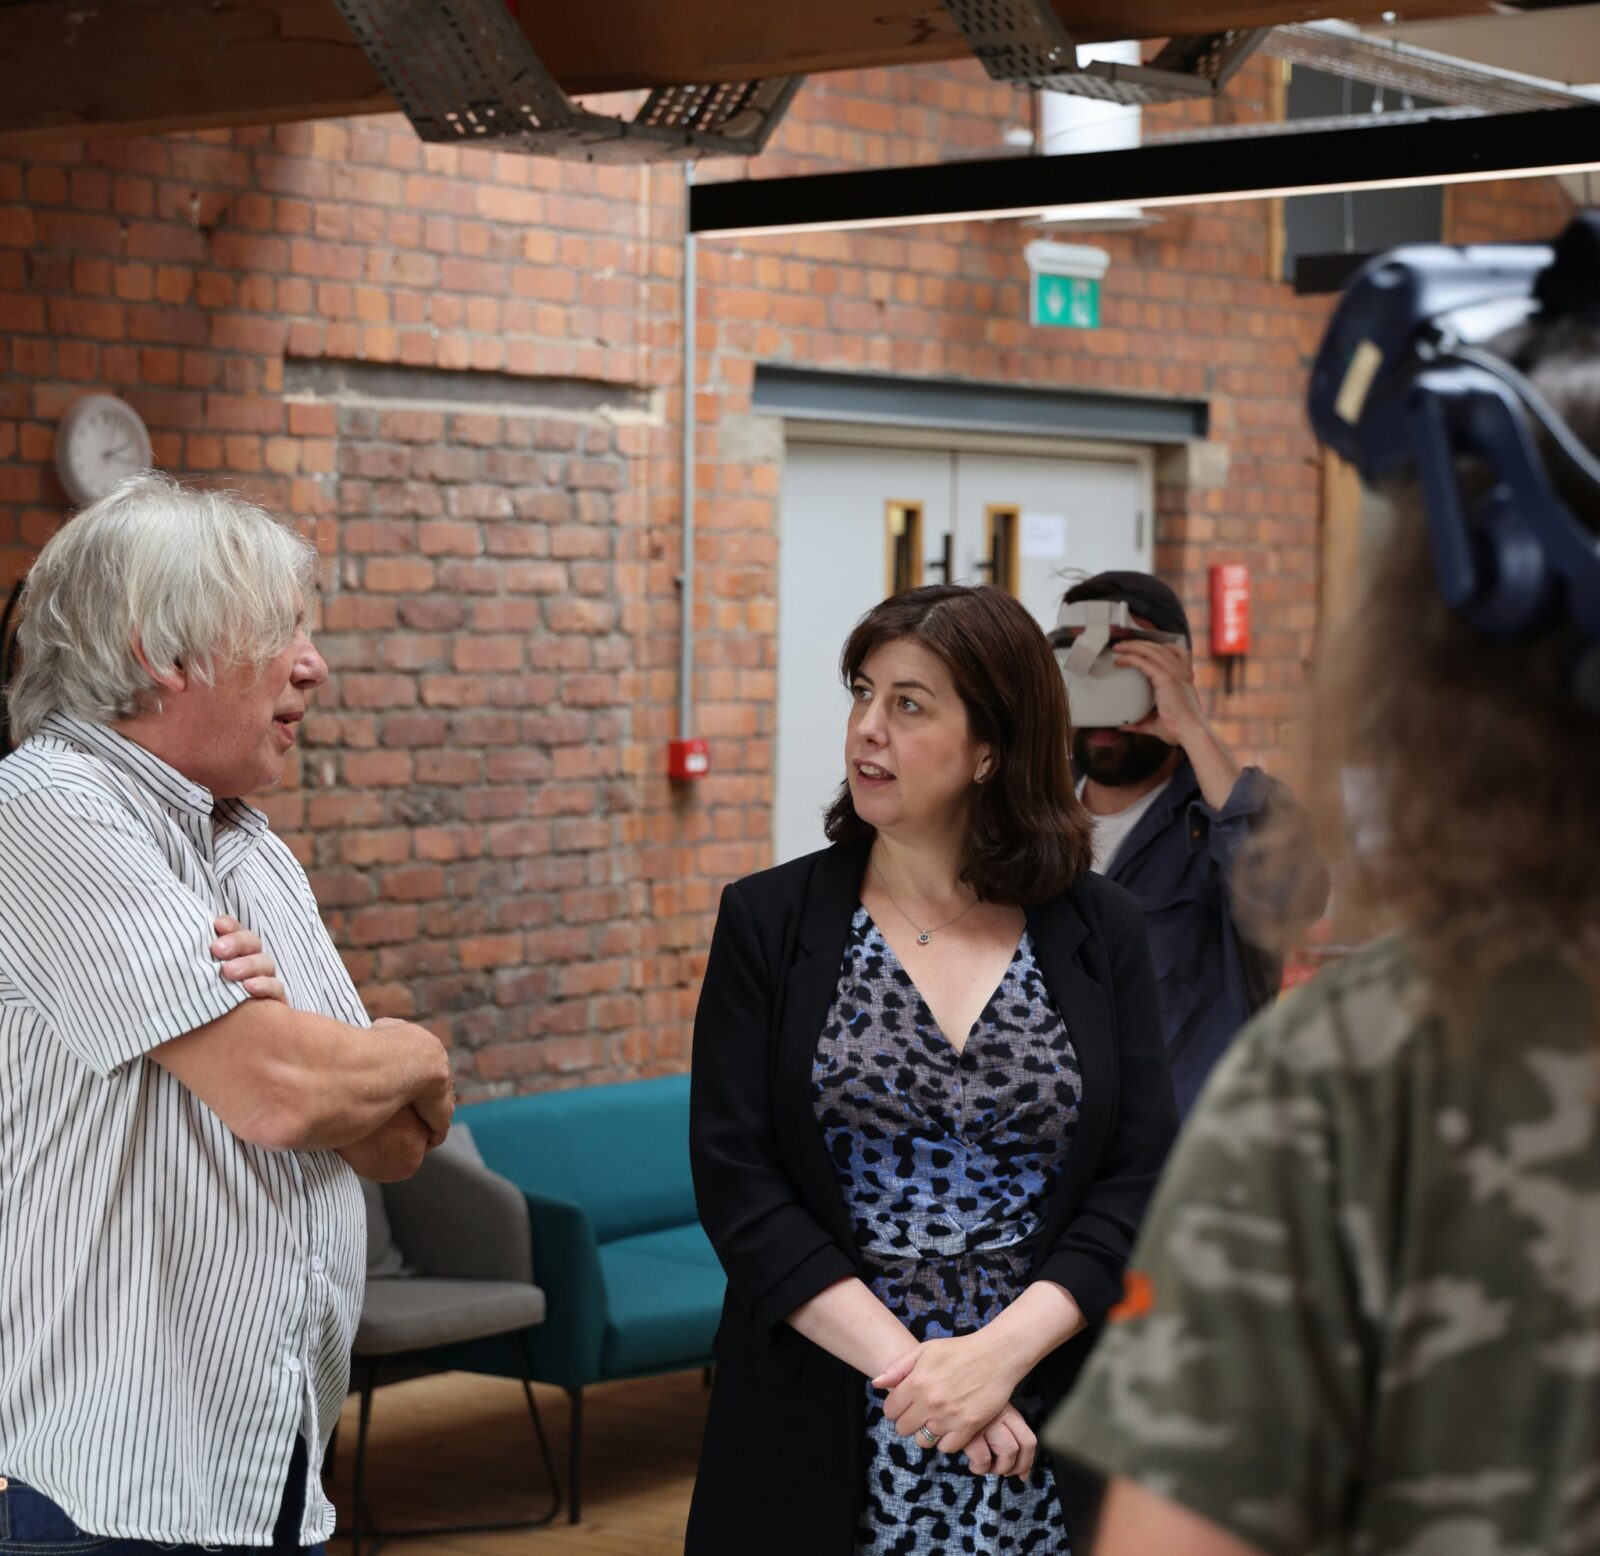 Lucy Powell at Pixel Mill, Northern Quarter, discussing AR technology.